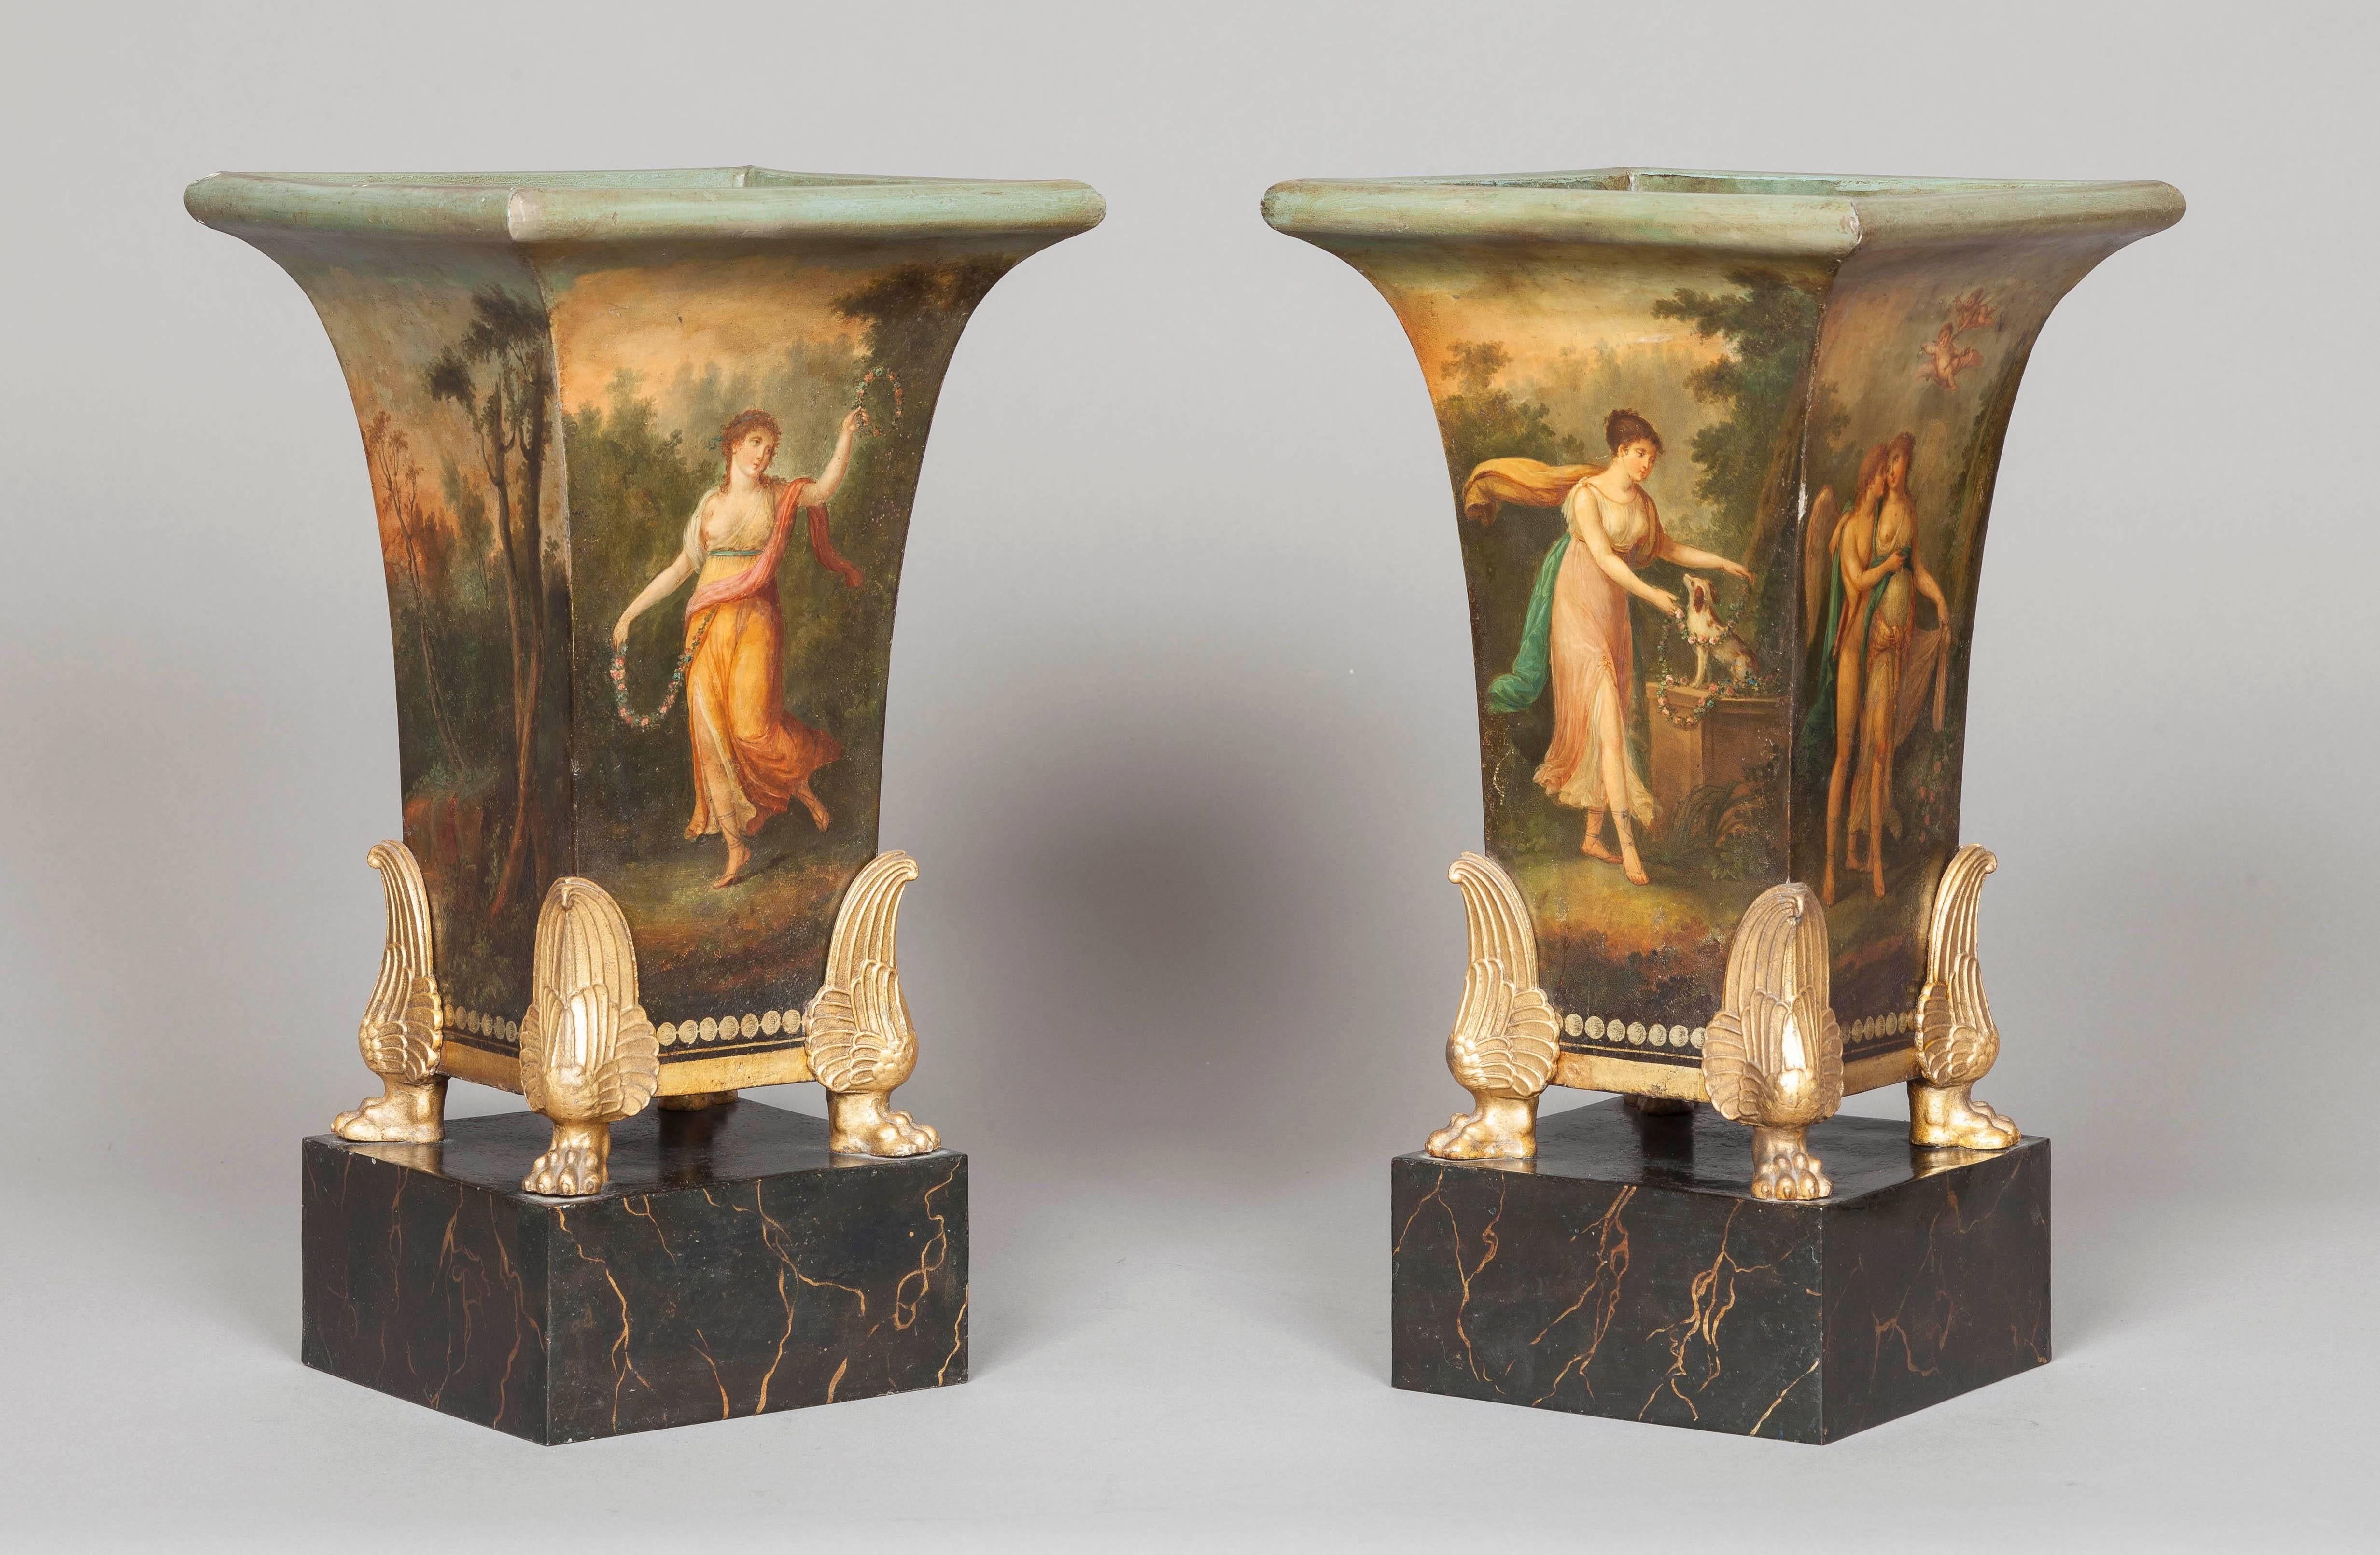 A Three Piece Jardinière Garniture of the Empire Period

Constructed in tole, being hand painted and decorated in the French Empire Neo-Classical manner of Jacques-Louis David; the bases decorated in faux marble, the central, larger jardinière